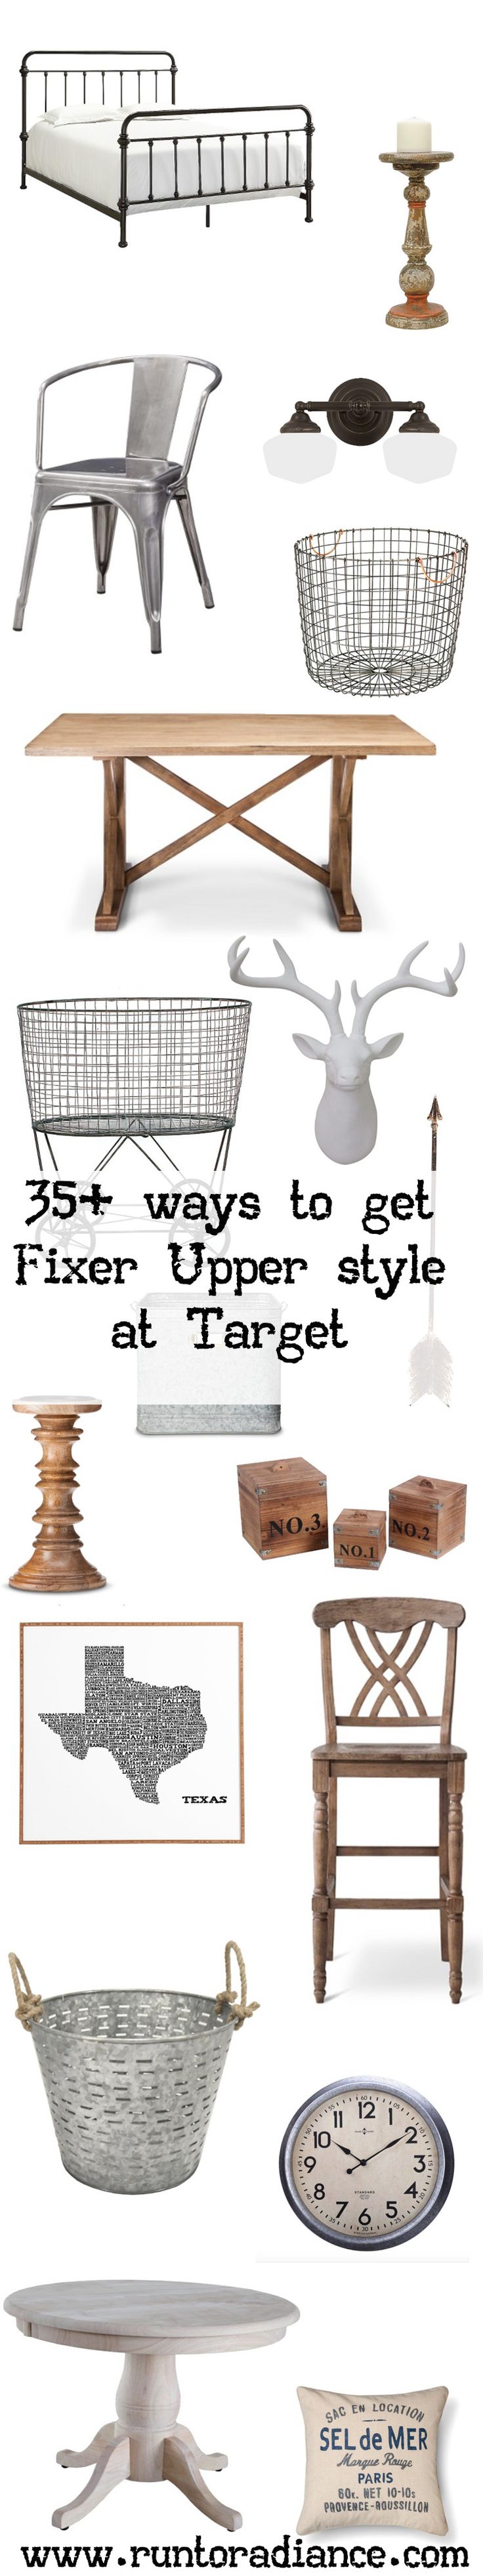 Over 30 ways to get Fixer Upper style from Target! Who knew their stuff was so c...